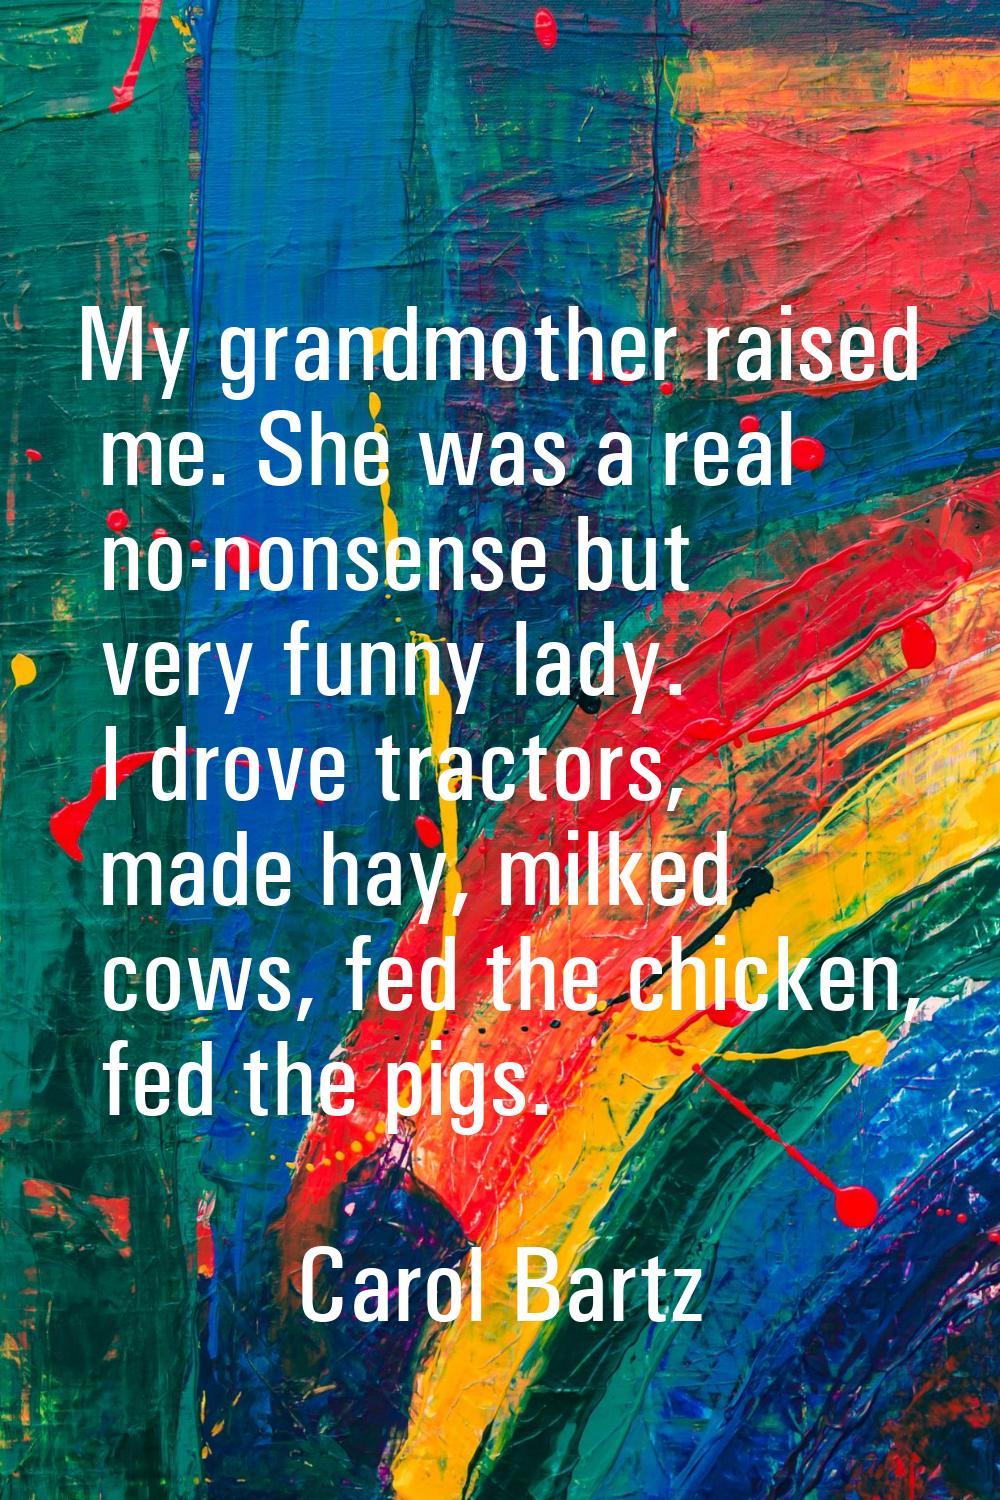 My grandmother raised me. She was a real no-nonsense but very funny lady. I drove tractors, made ha